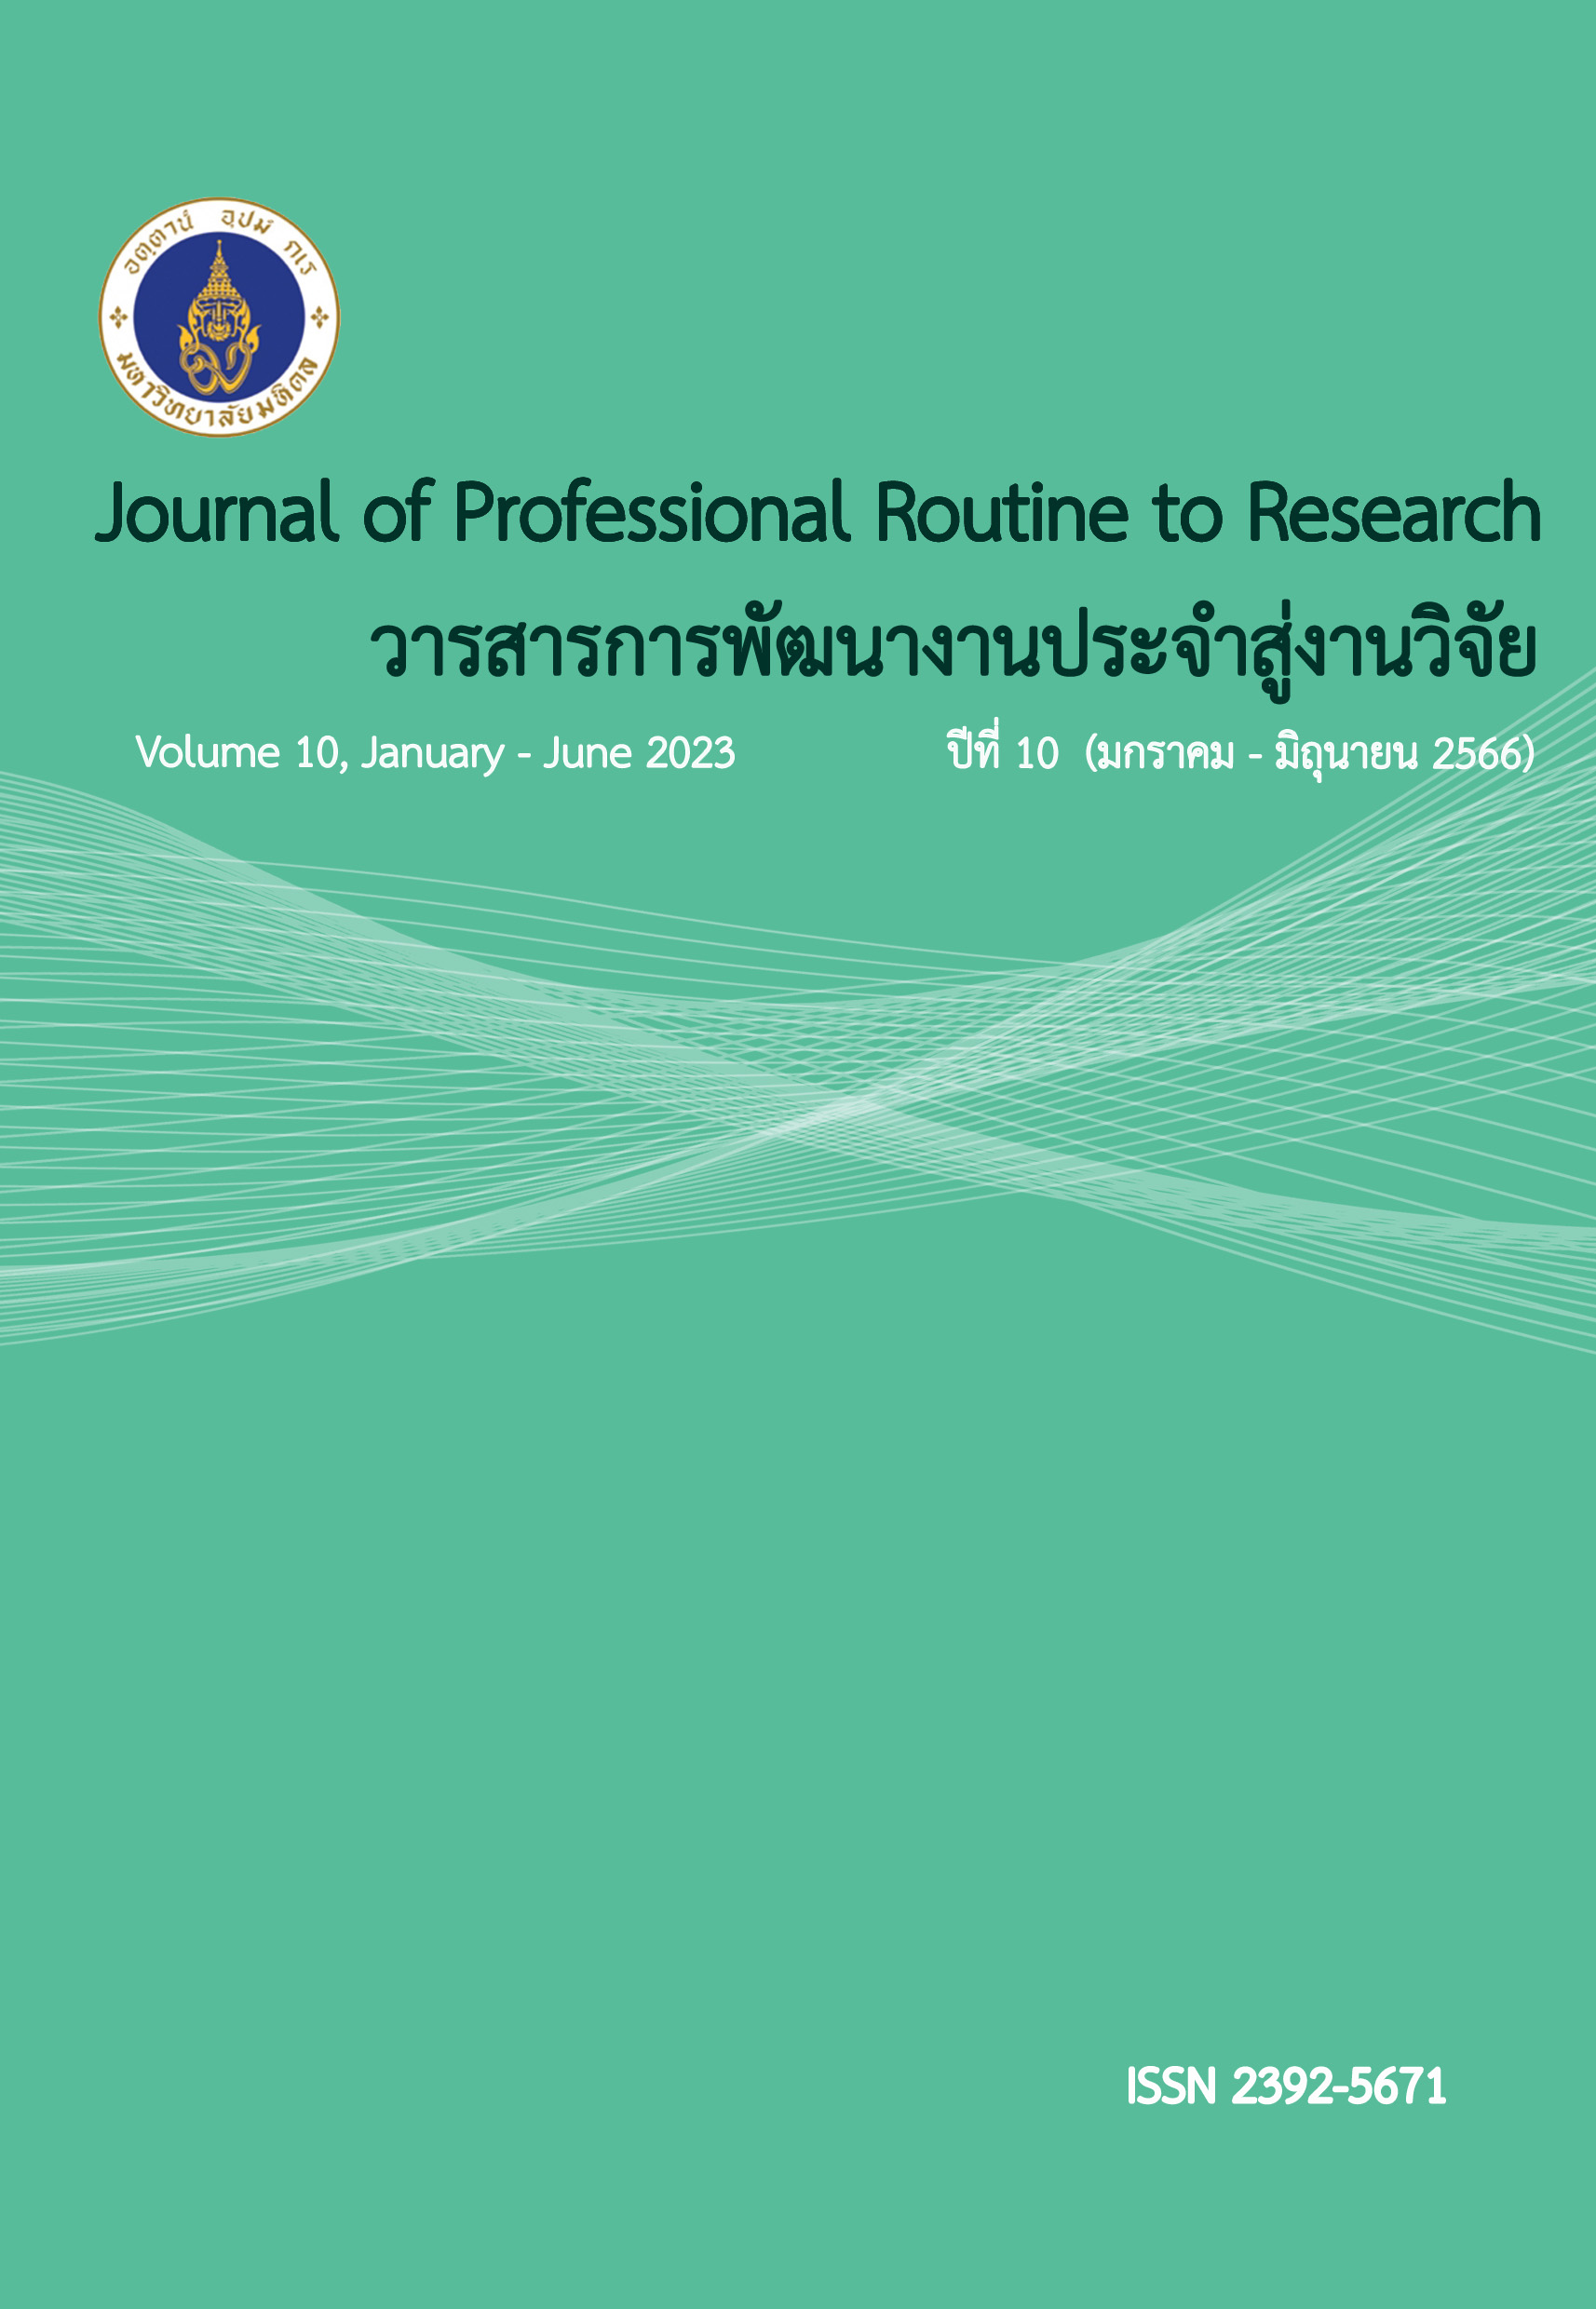 					View Vol. 10 No. 1 (2023): Journal of Professional Routine to Research (JPR2R)
				